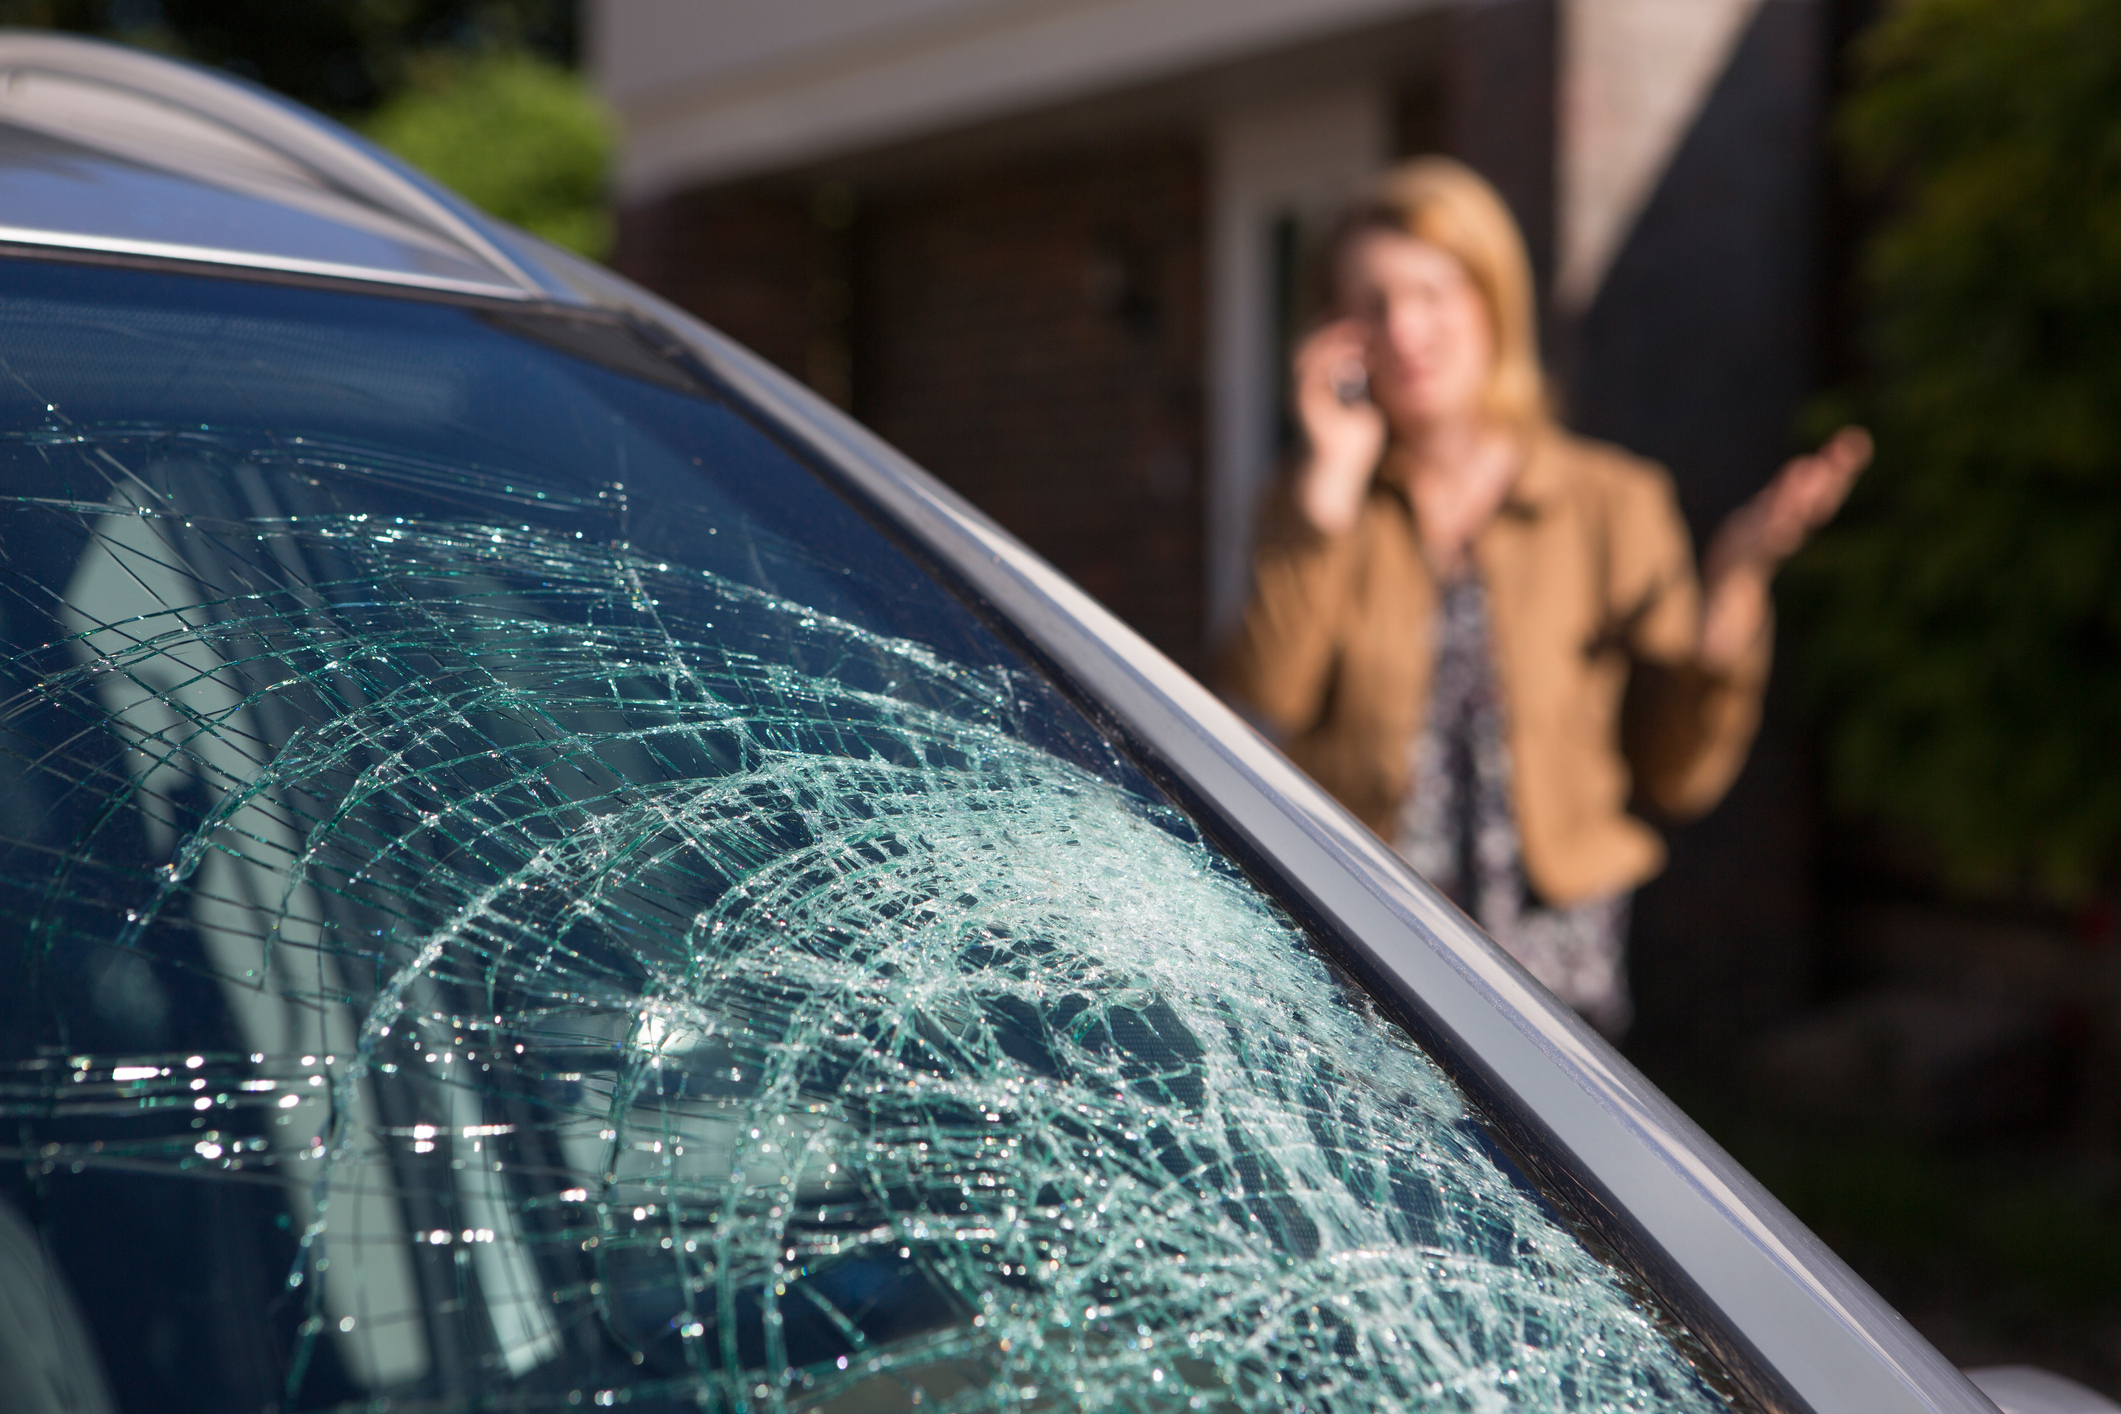 A woman on the phone looking at her cracked windshield